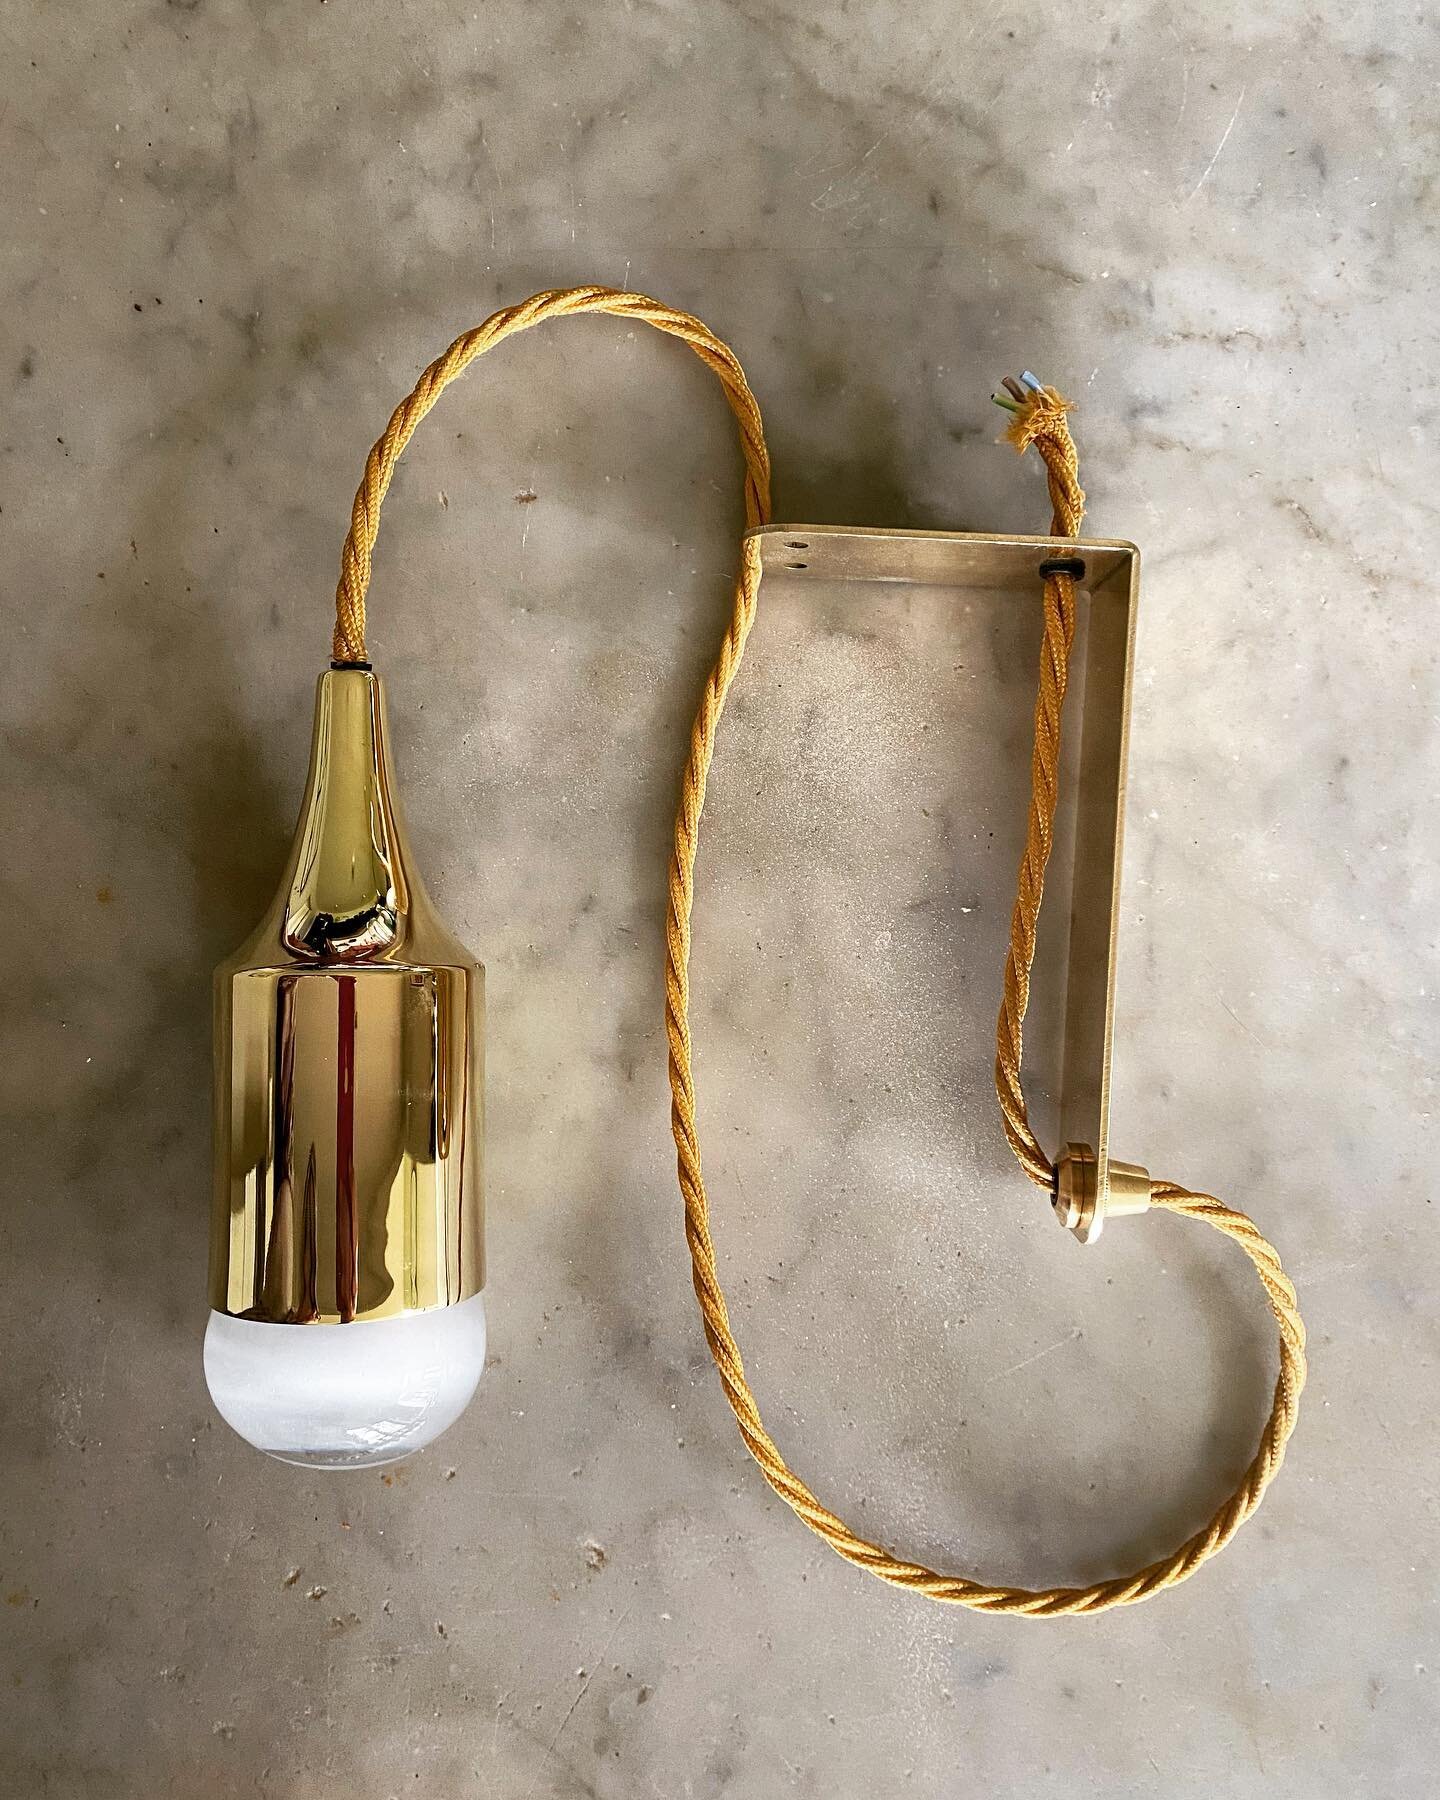 A Droplet walllight.
Just packing some pieces for the exhibition next week.
Stopped, this is so pretty, it&rsquo;s the Droplet on a gold twisted flex on a bracket I designed for @ginafosterinteriors project.
Hand turned brass, hand blown crystal glas